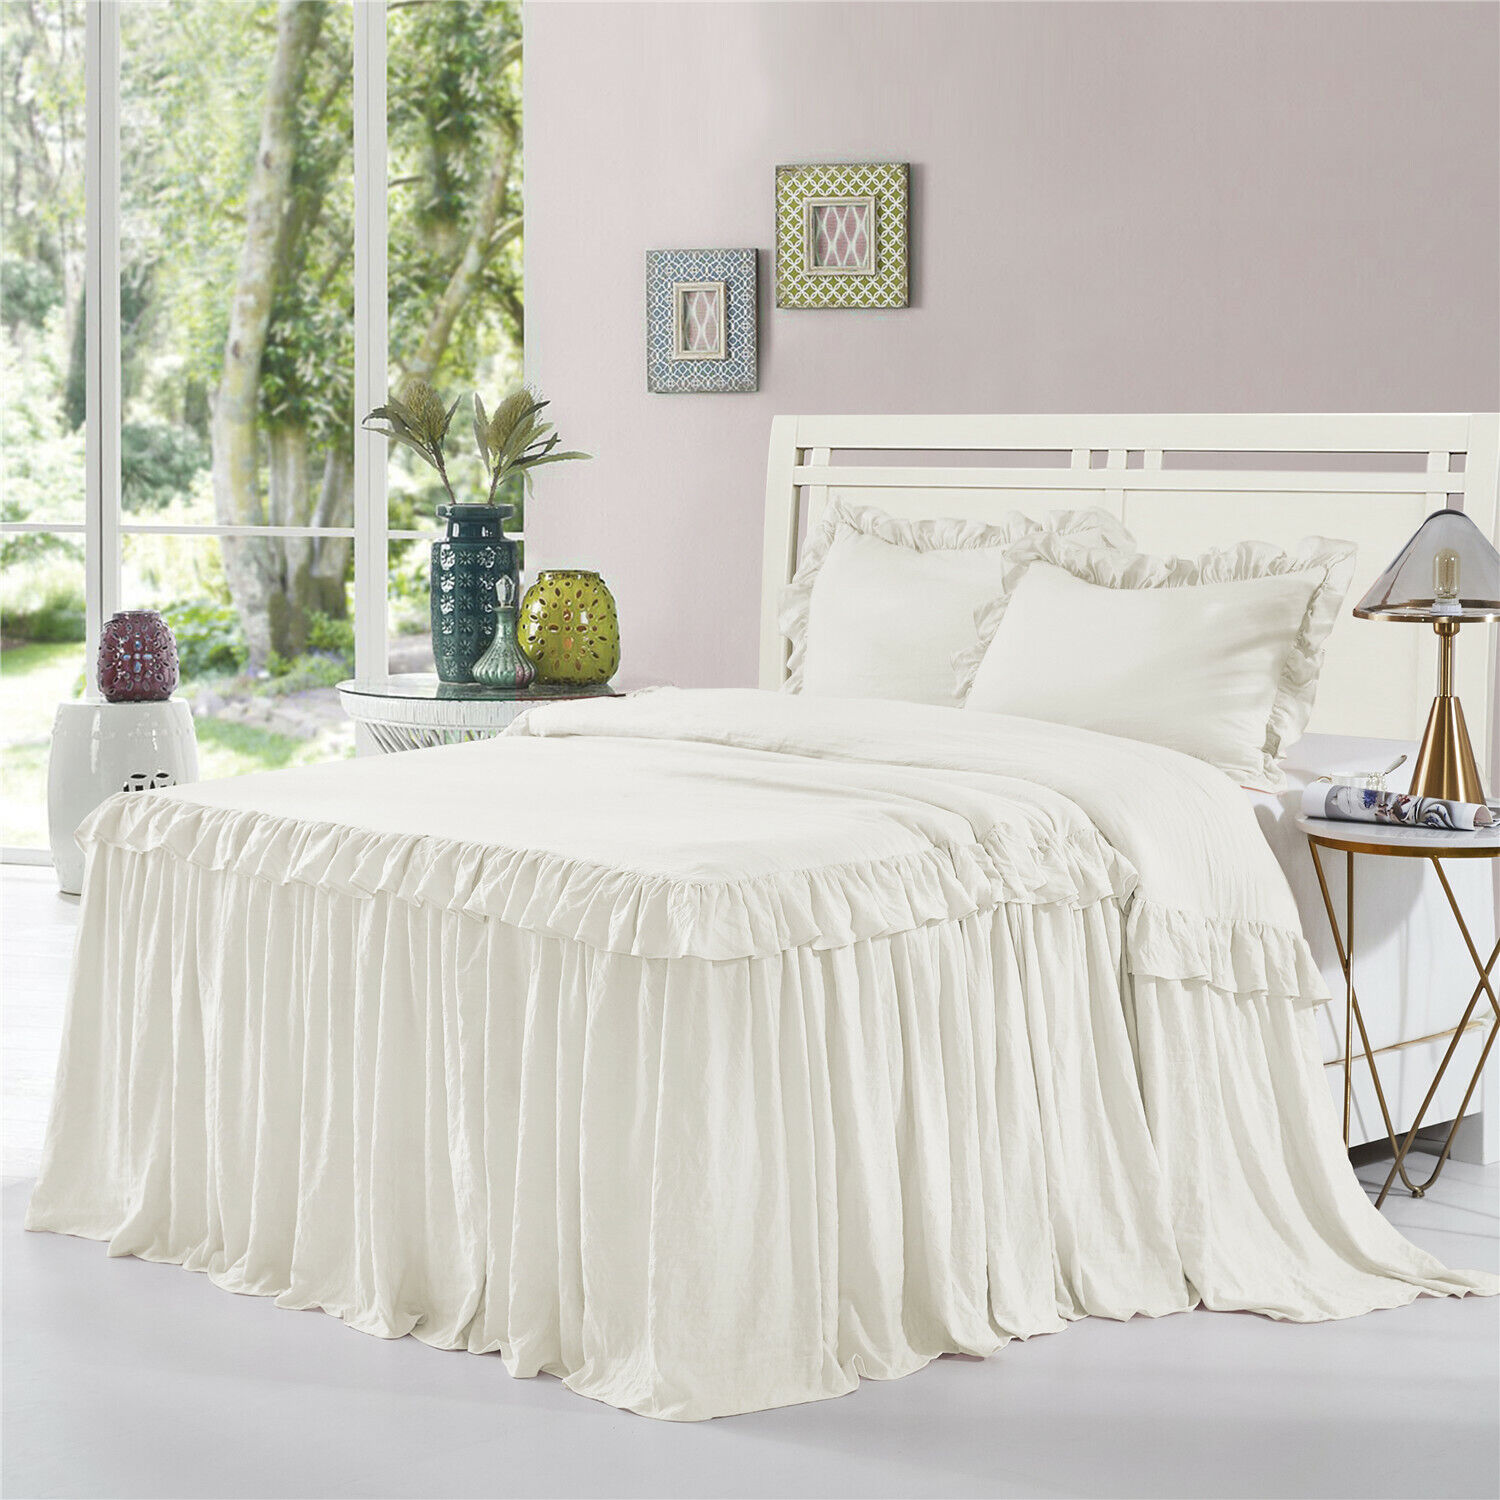 HIG 3 Piece ALINA Luxurious Ruffle Skirt Bedspread Set 30 inches Drop - Ivory